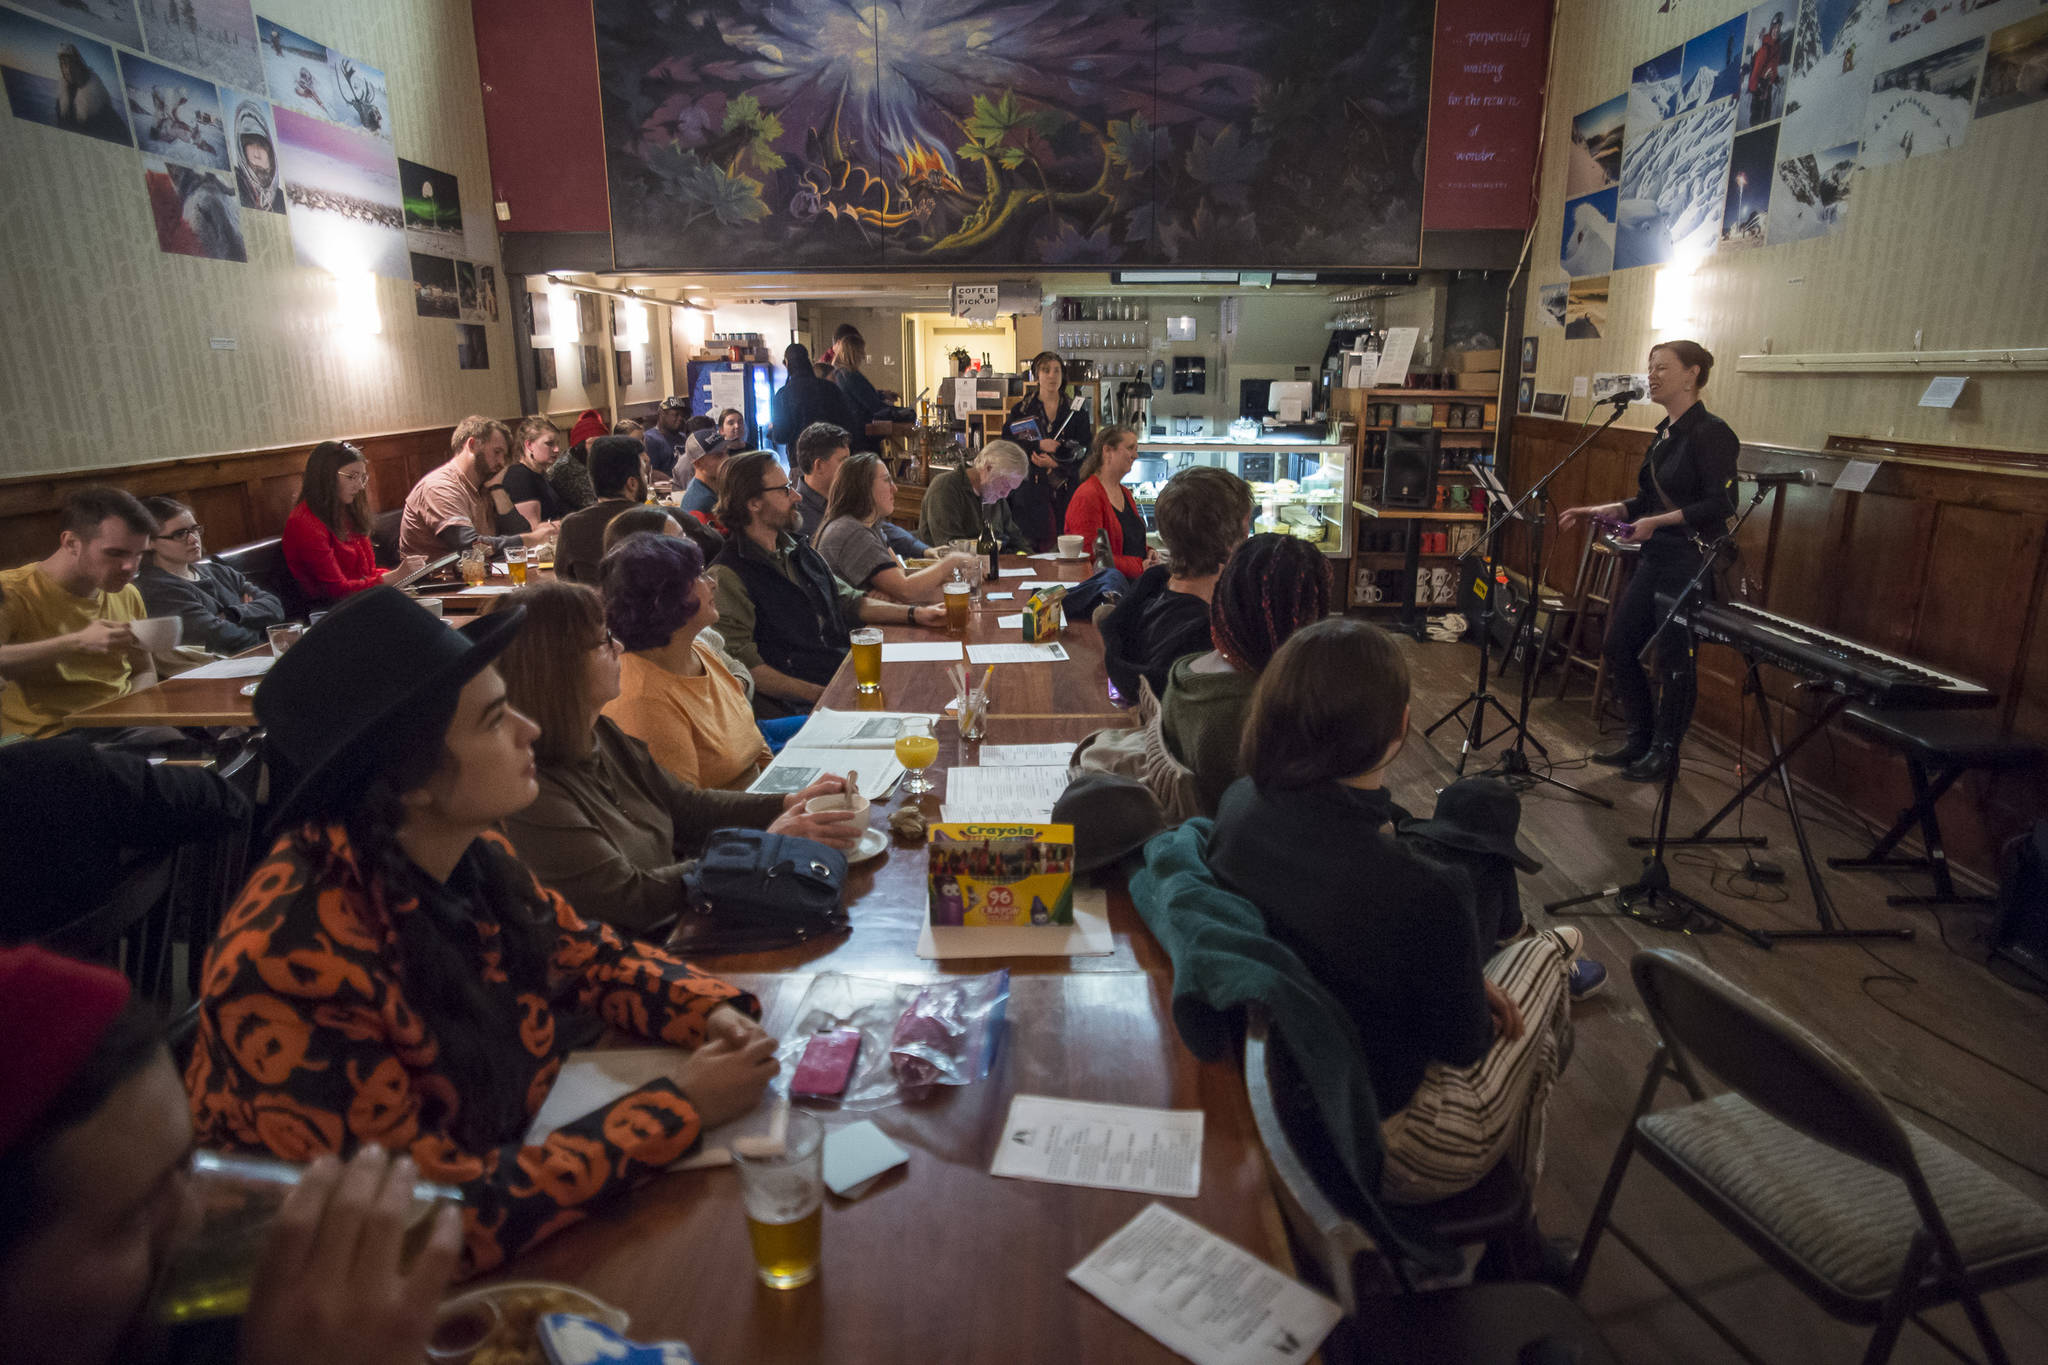 Event organizer and musician Marian Call sings a song to open the Mountainside Open Mic & Art Night at The Rookery in October 2018. The popular open mic series is becoming an online event in light of the COVID-19 pandemic. (Michael Penn | Juneau Empire File)